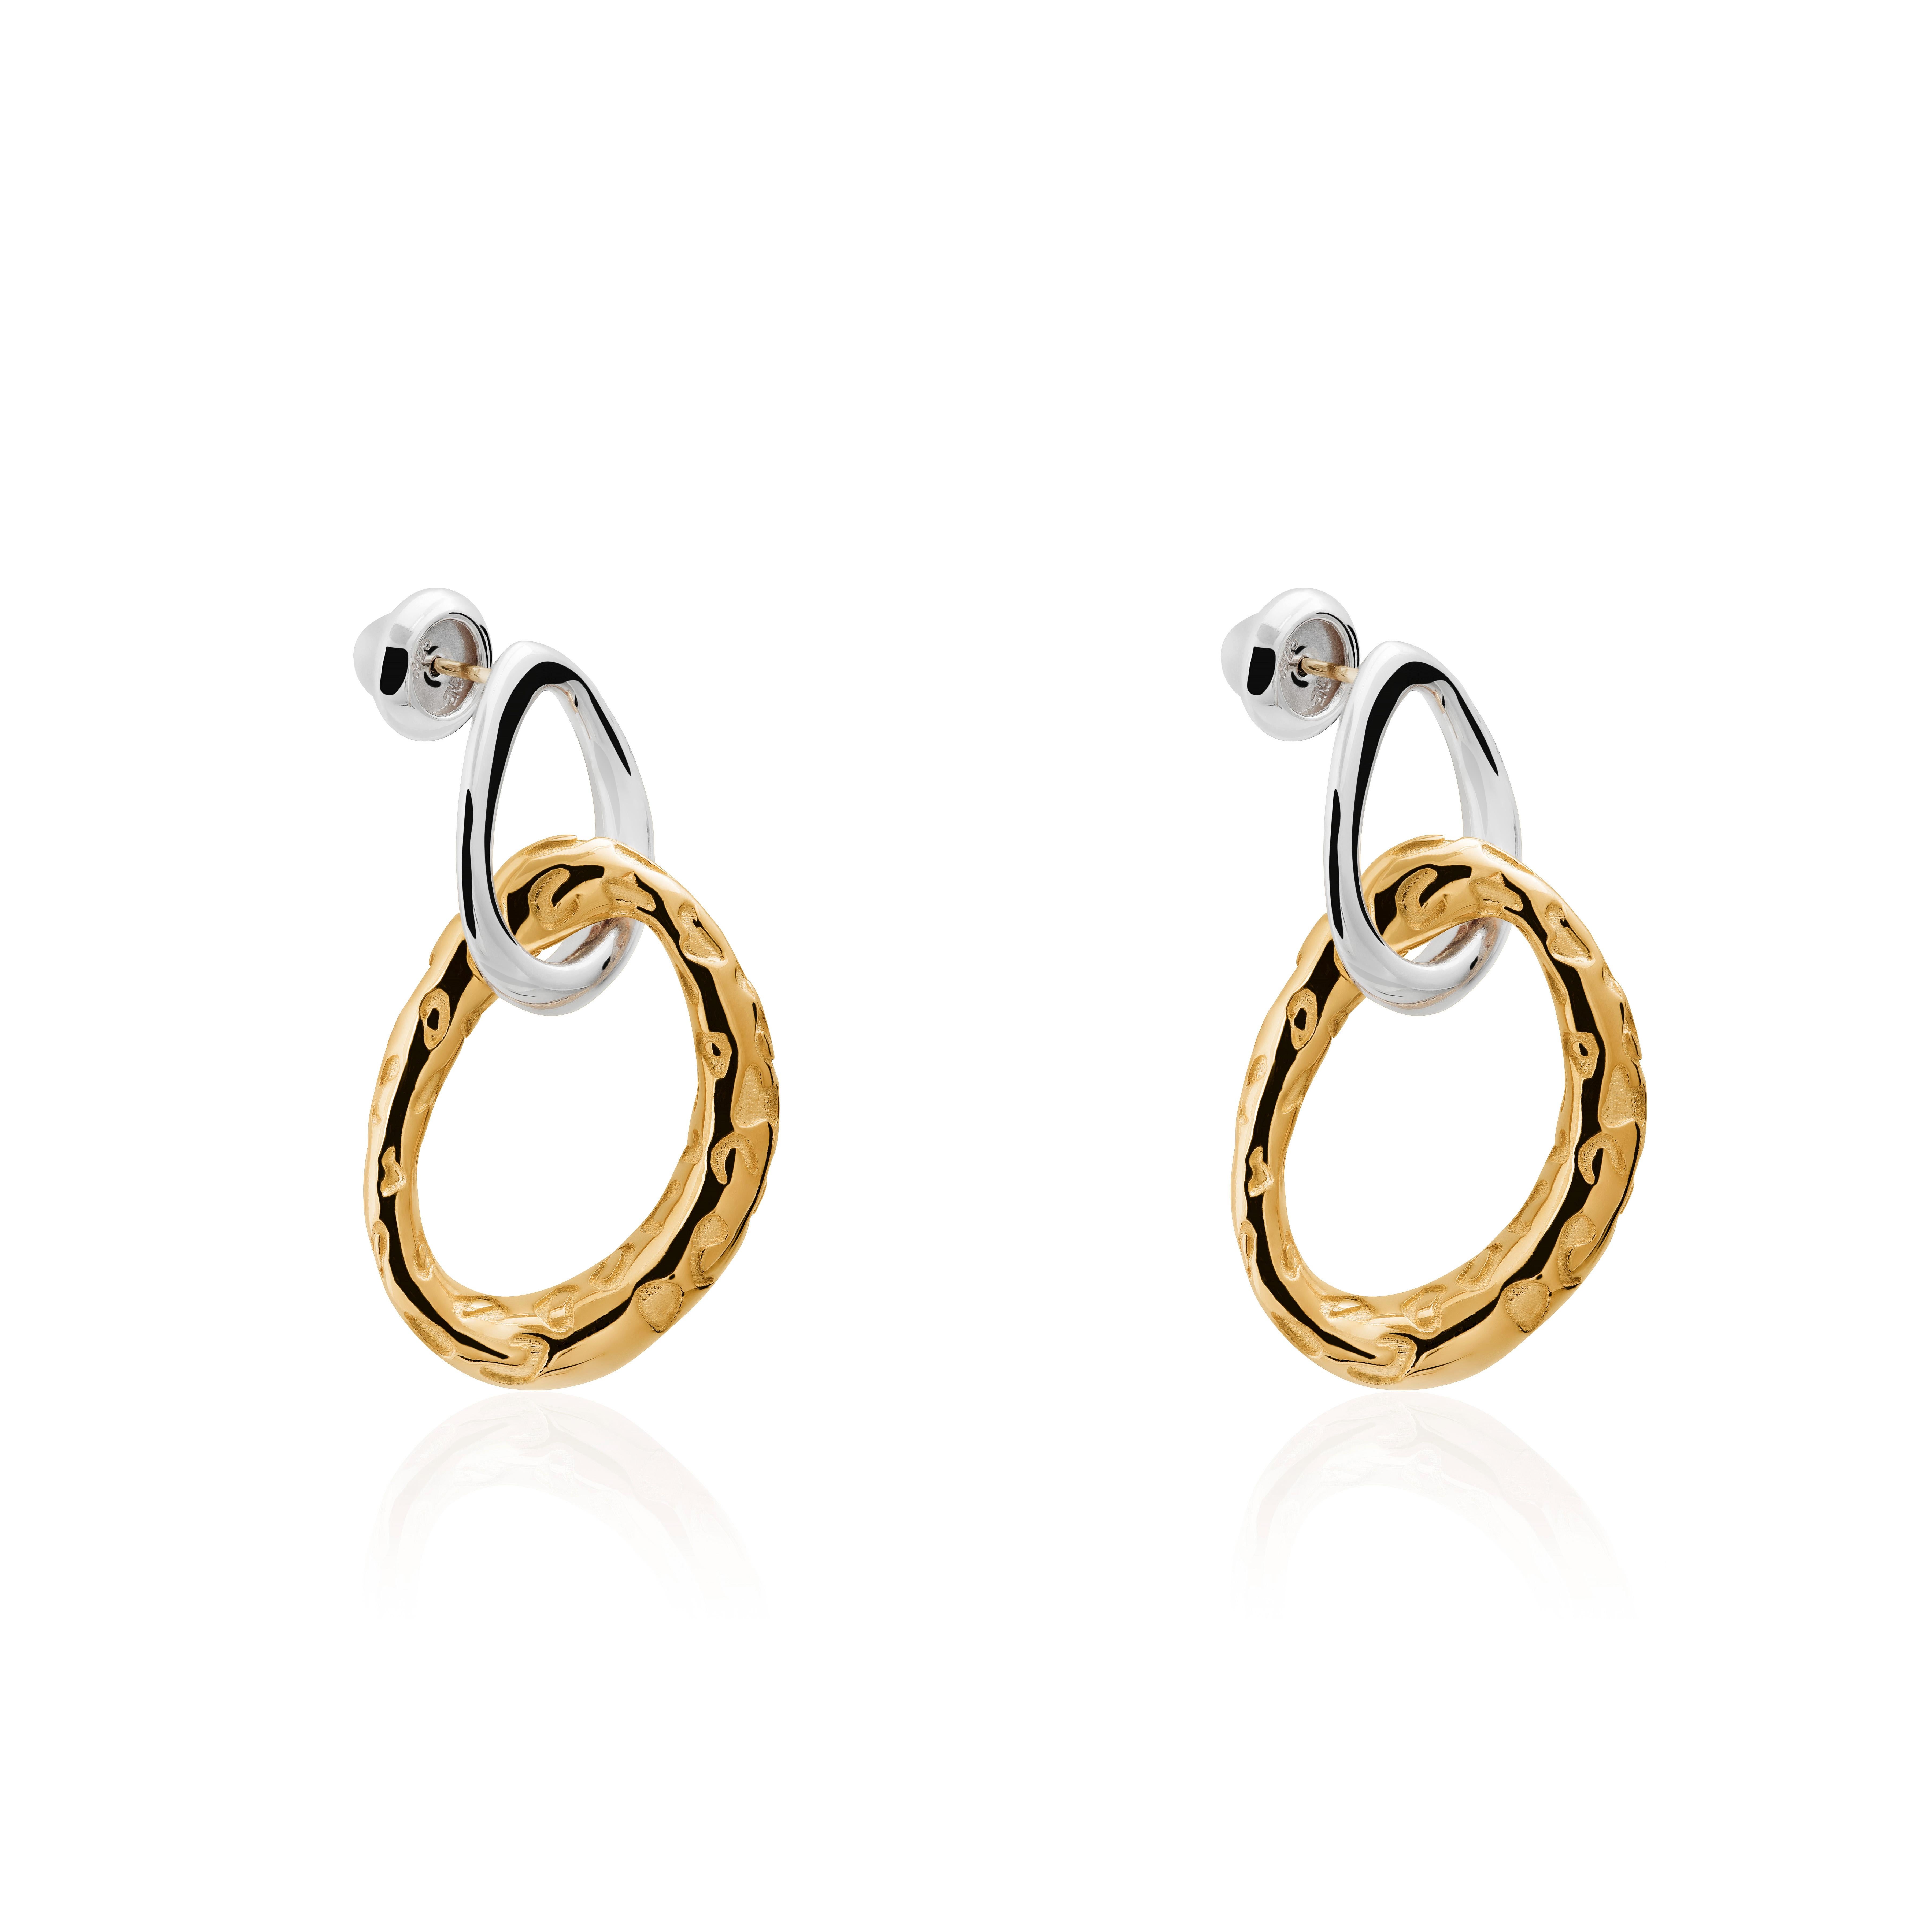 The Jaguar Earrings from the Animales Collection by TANE are made in sterling silver with 23 karat yellow gold vermeil, they are composed of a pair of contrasting links. The first one, made of polished silver, is contrasted with the second one of